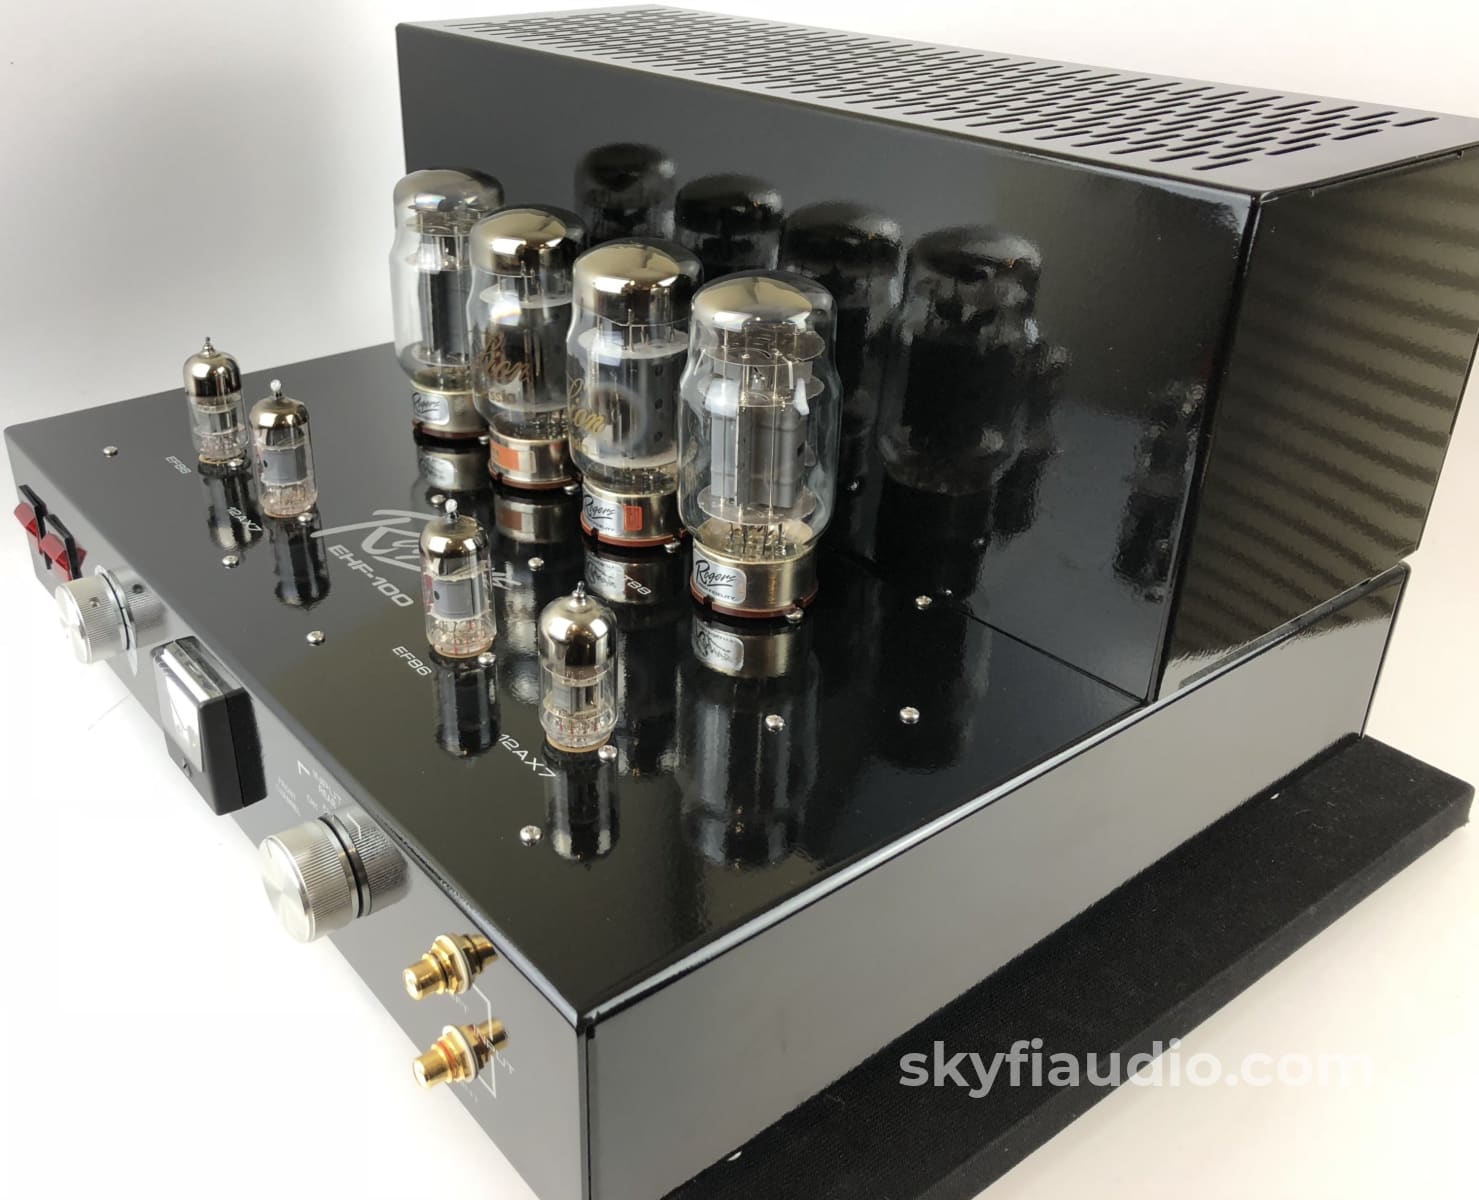 Rogers High Fidelity Ehf-100 Integrated Tube Amplifier - Complete Under Warranty